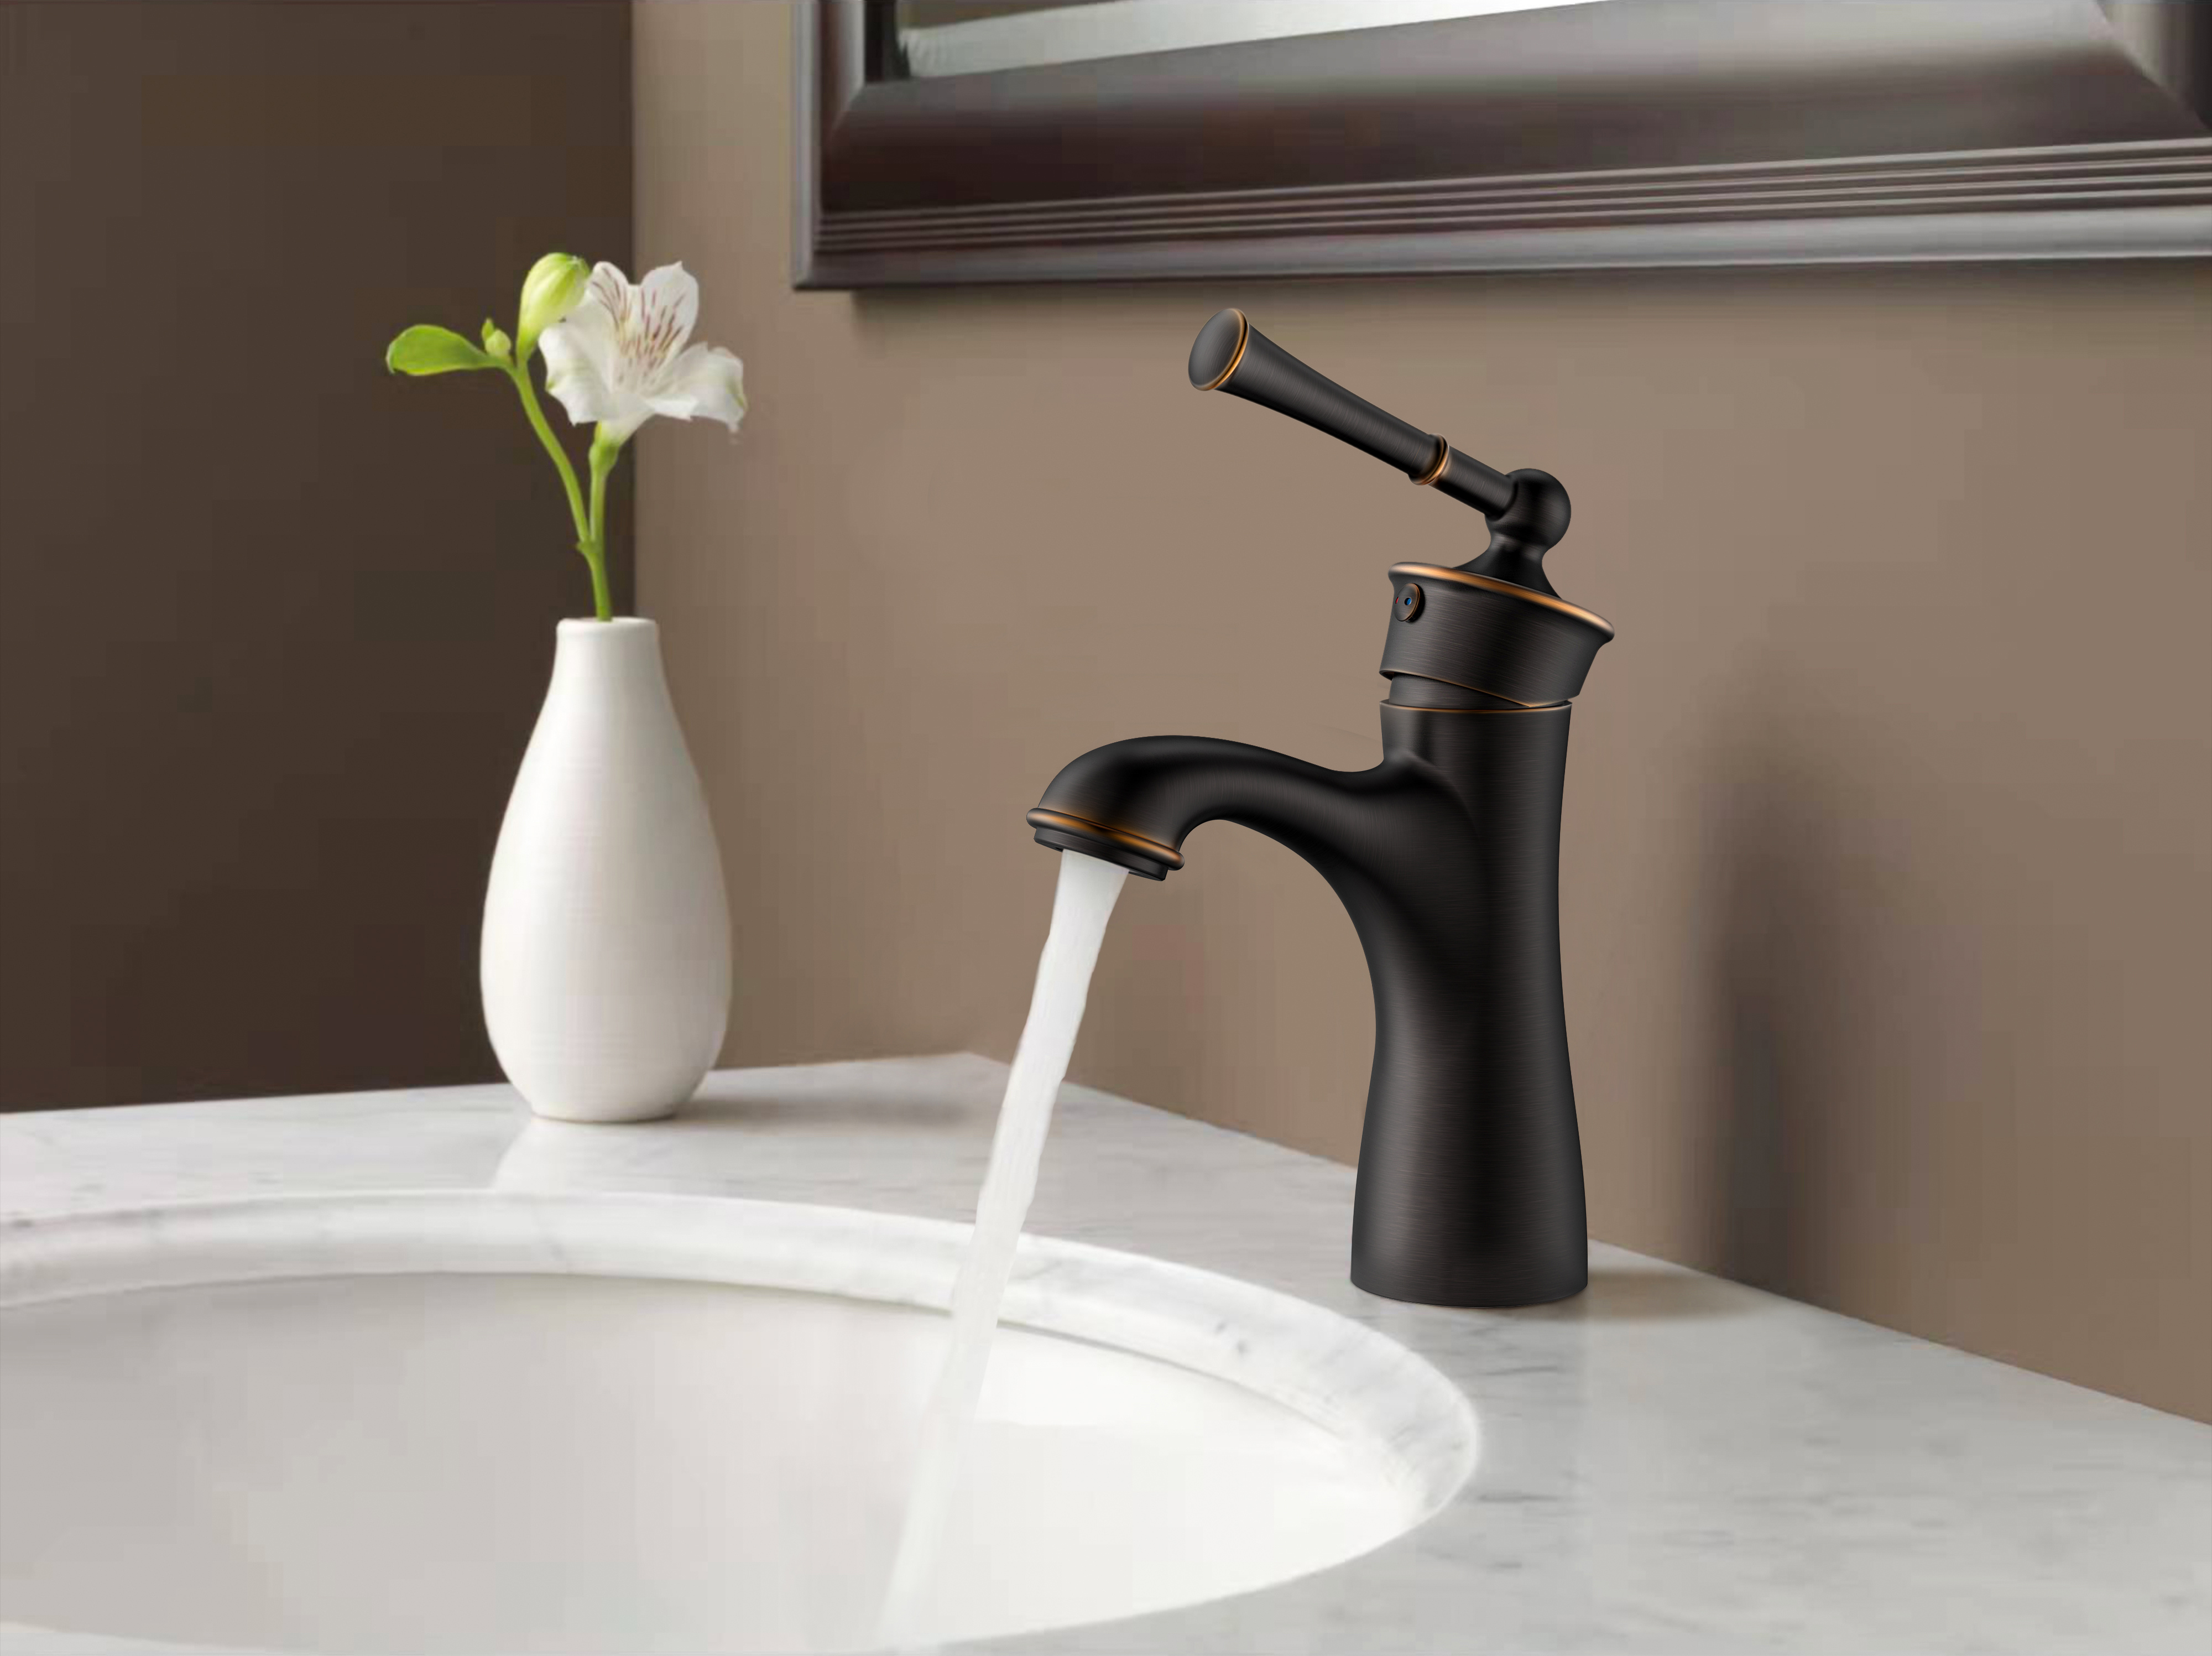 Style Redefined: Exploring the Ageless Attraction of Matte Black and Standard Chrome Bathroom Faucets